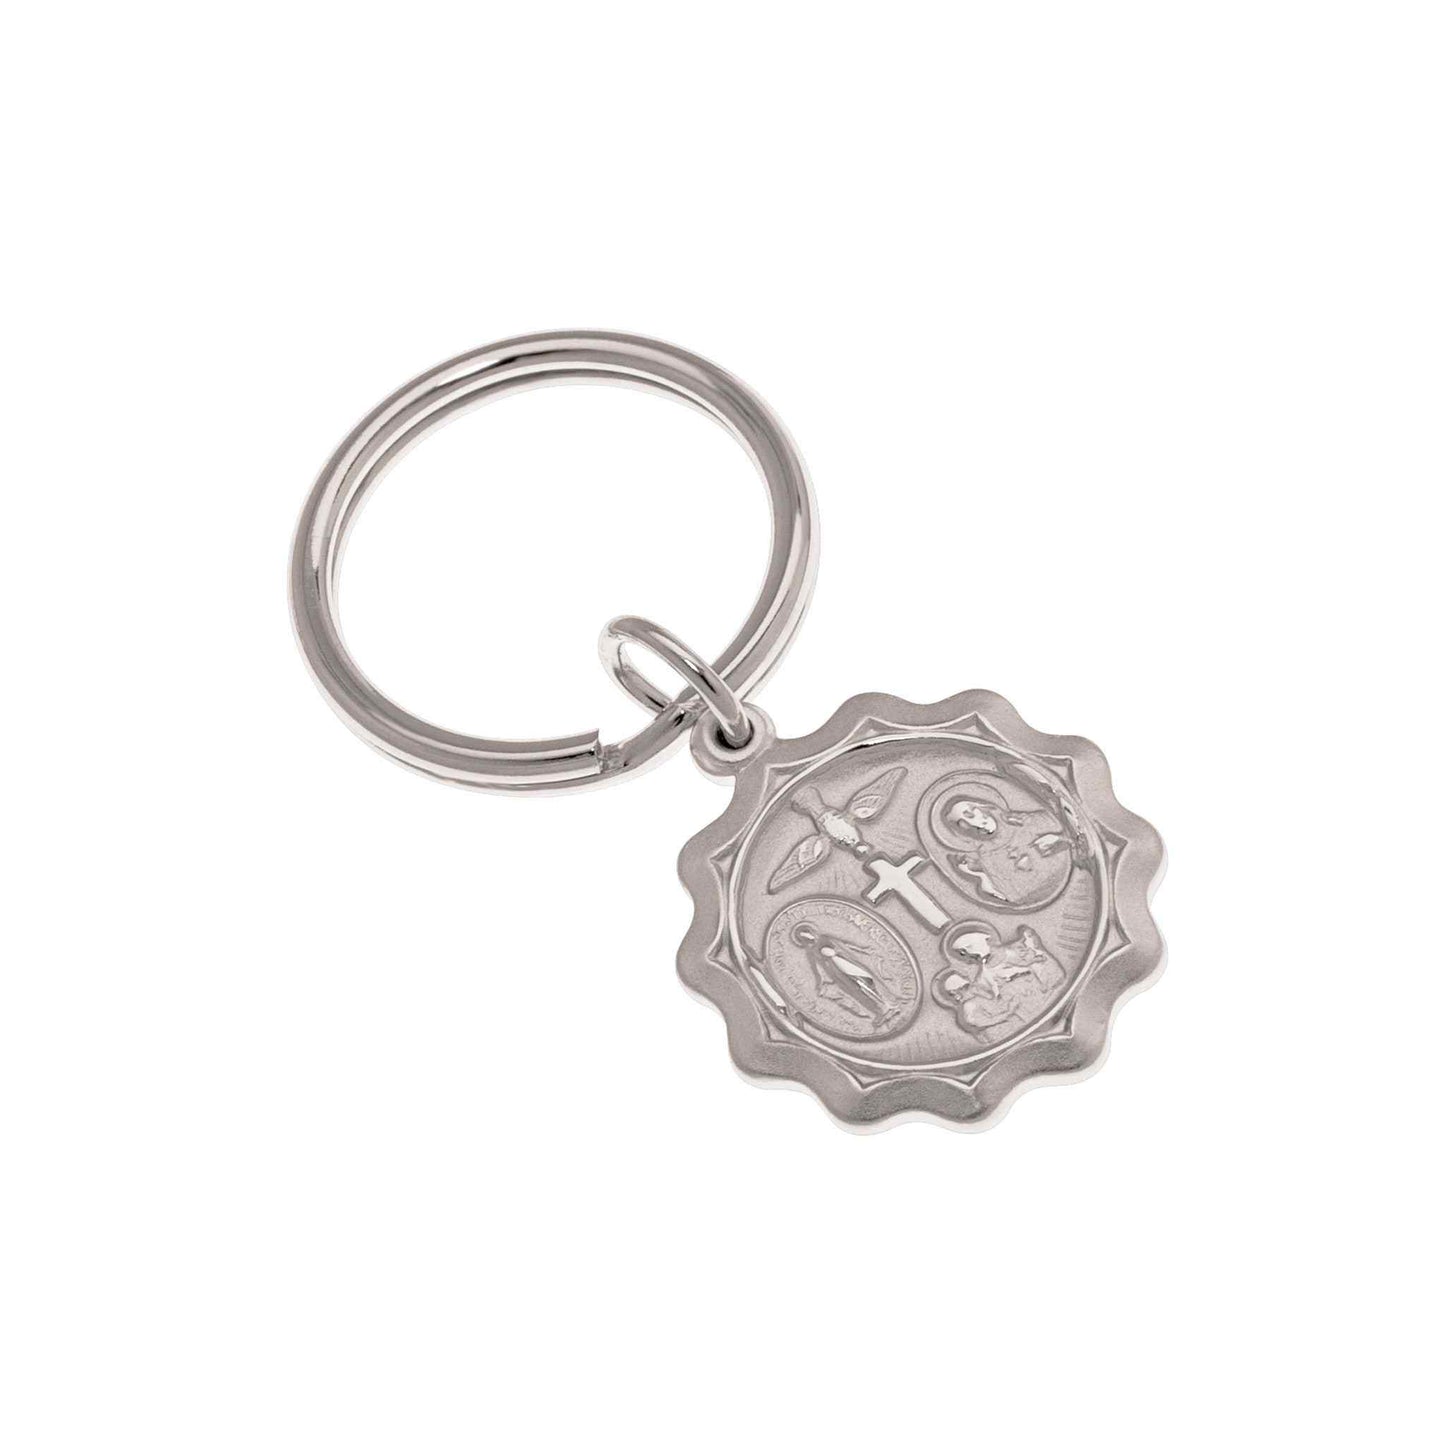 A five-way medal key ring displayed on a neutral white background.